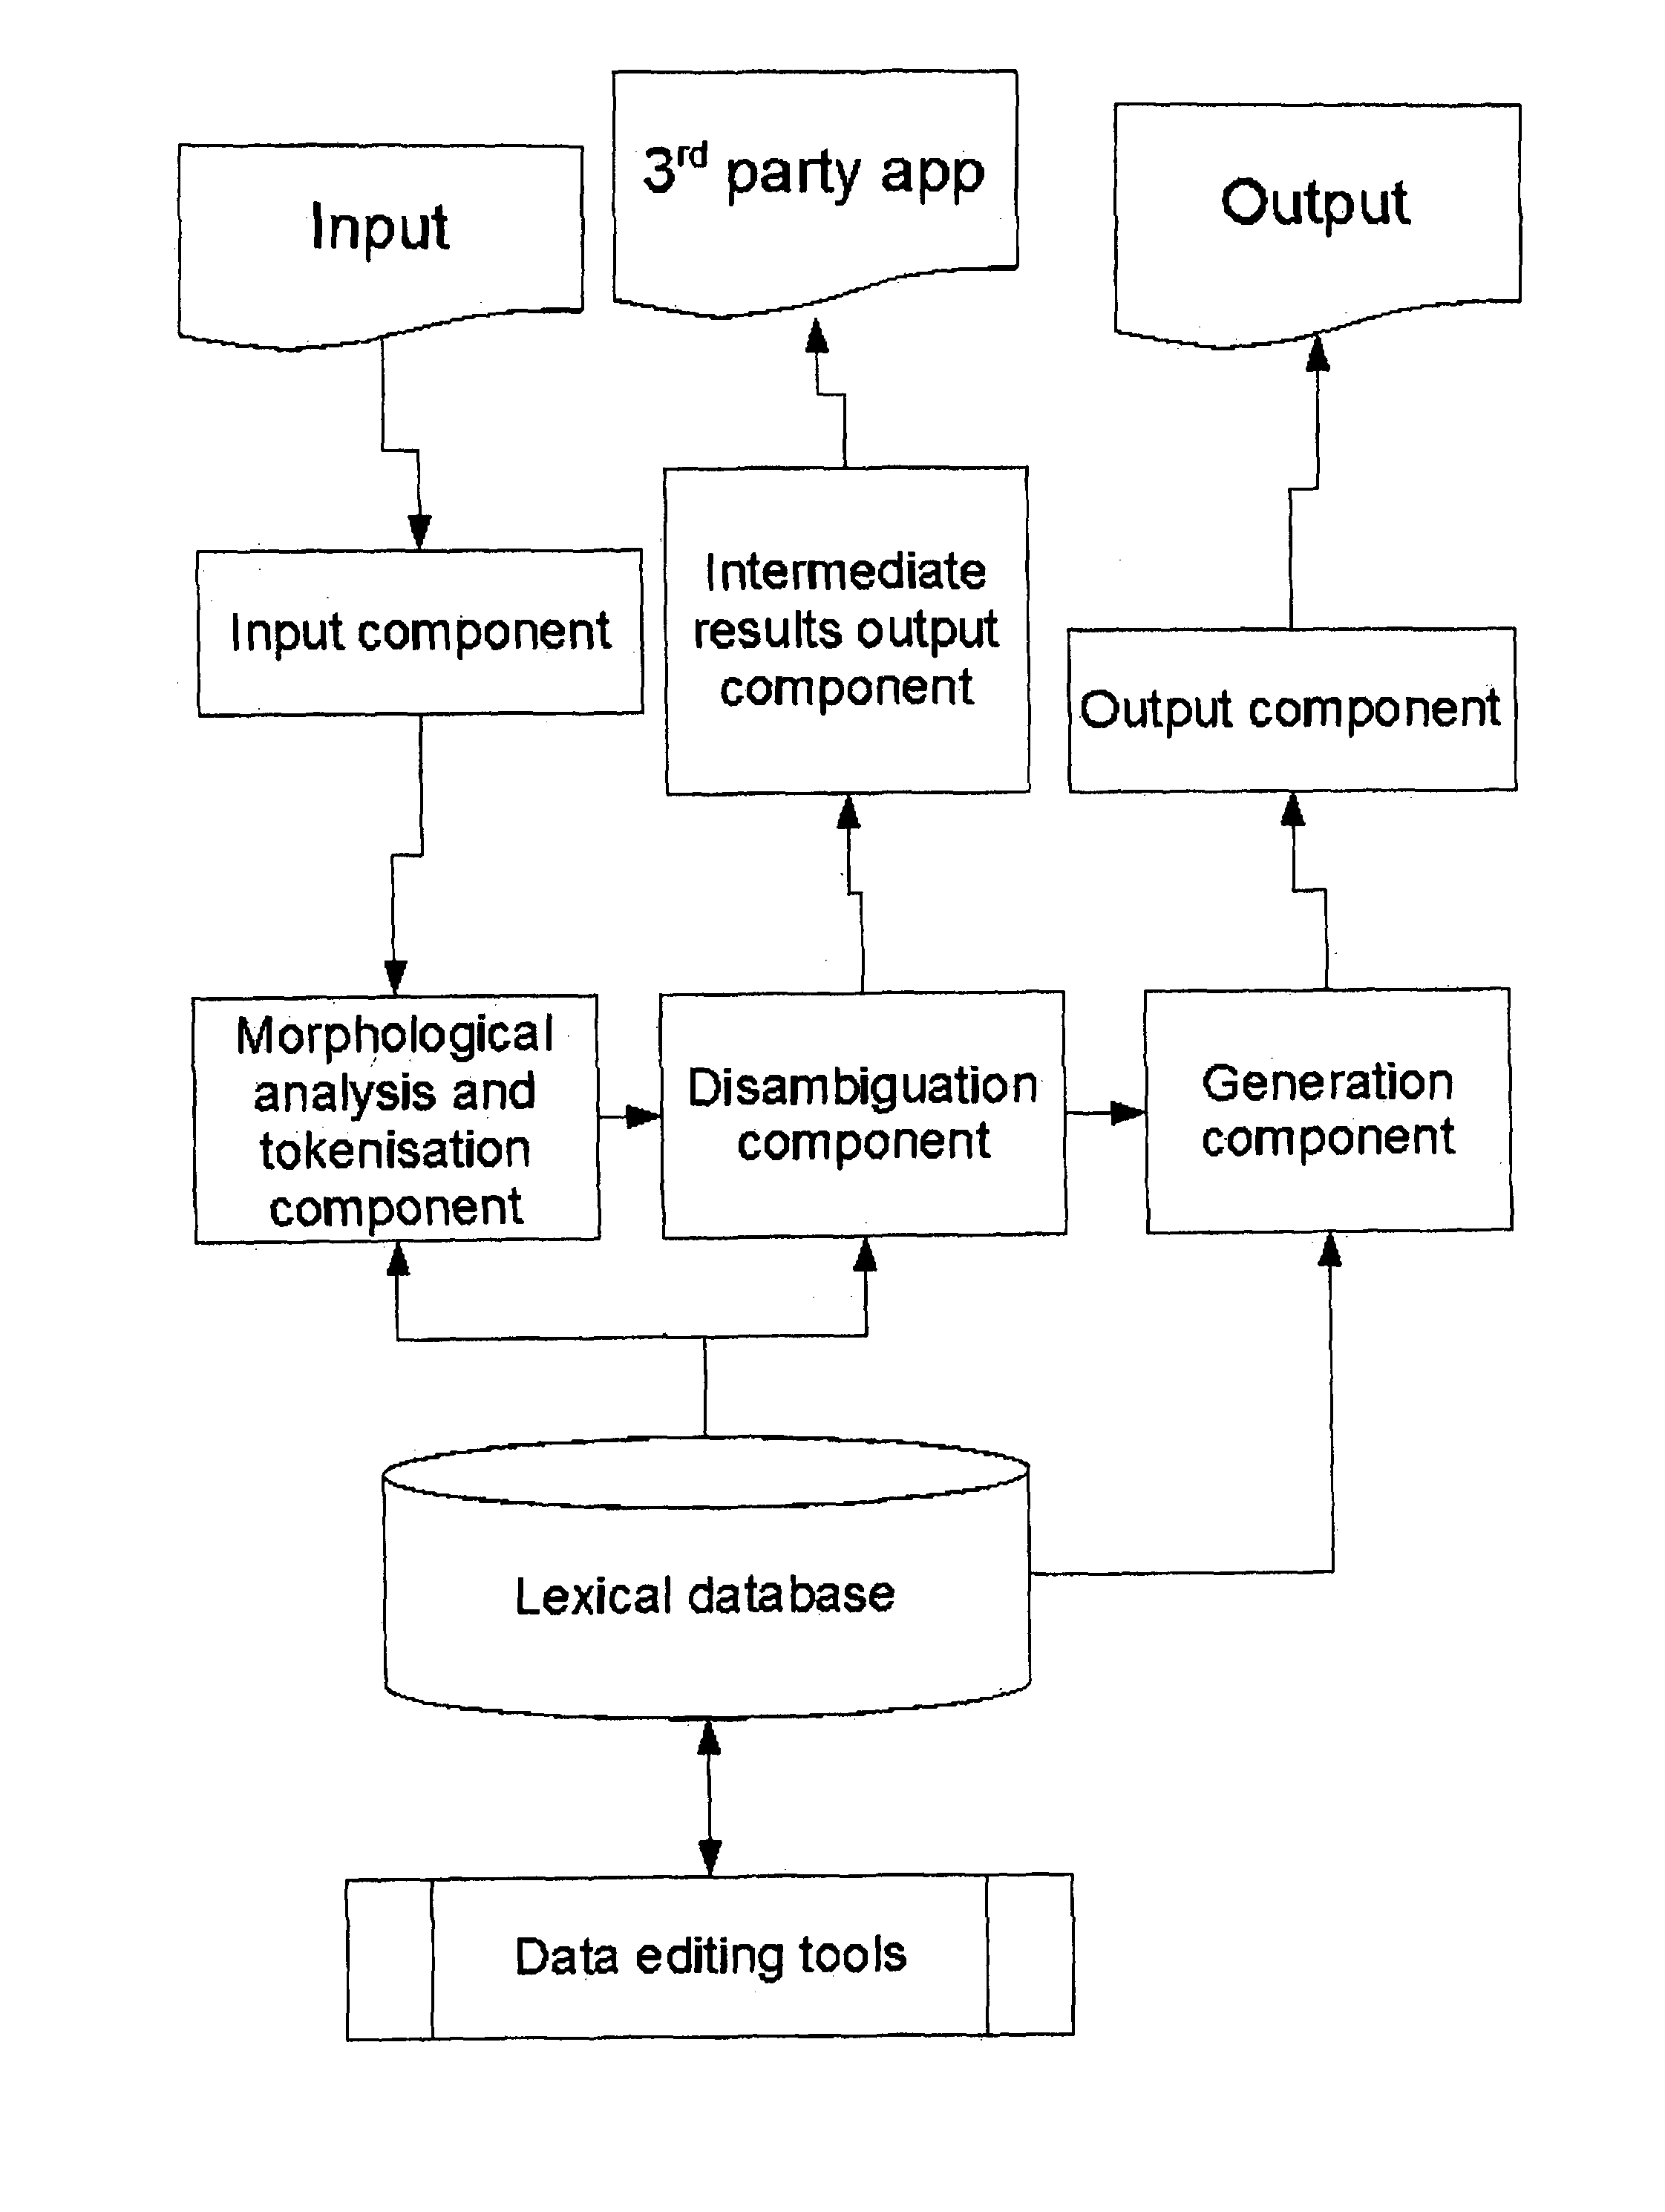 Generic system for linguistic analysis and transformation